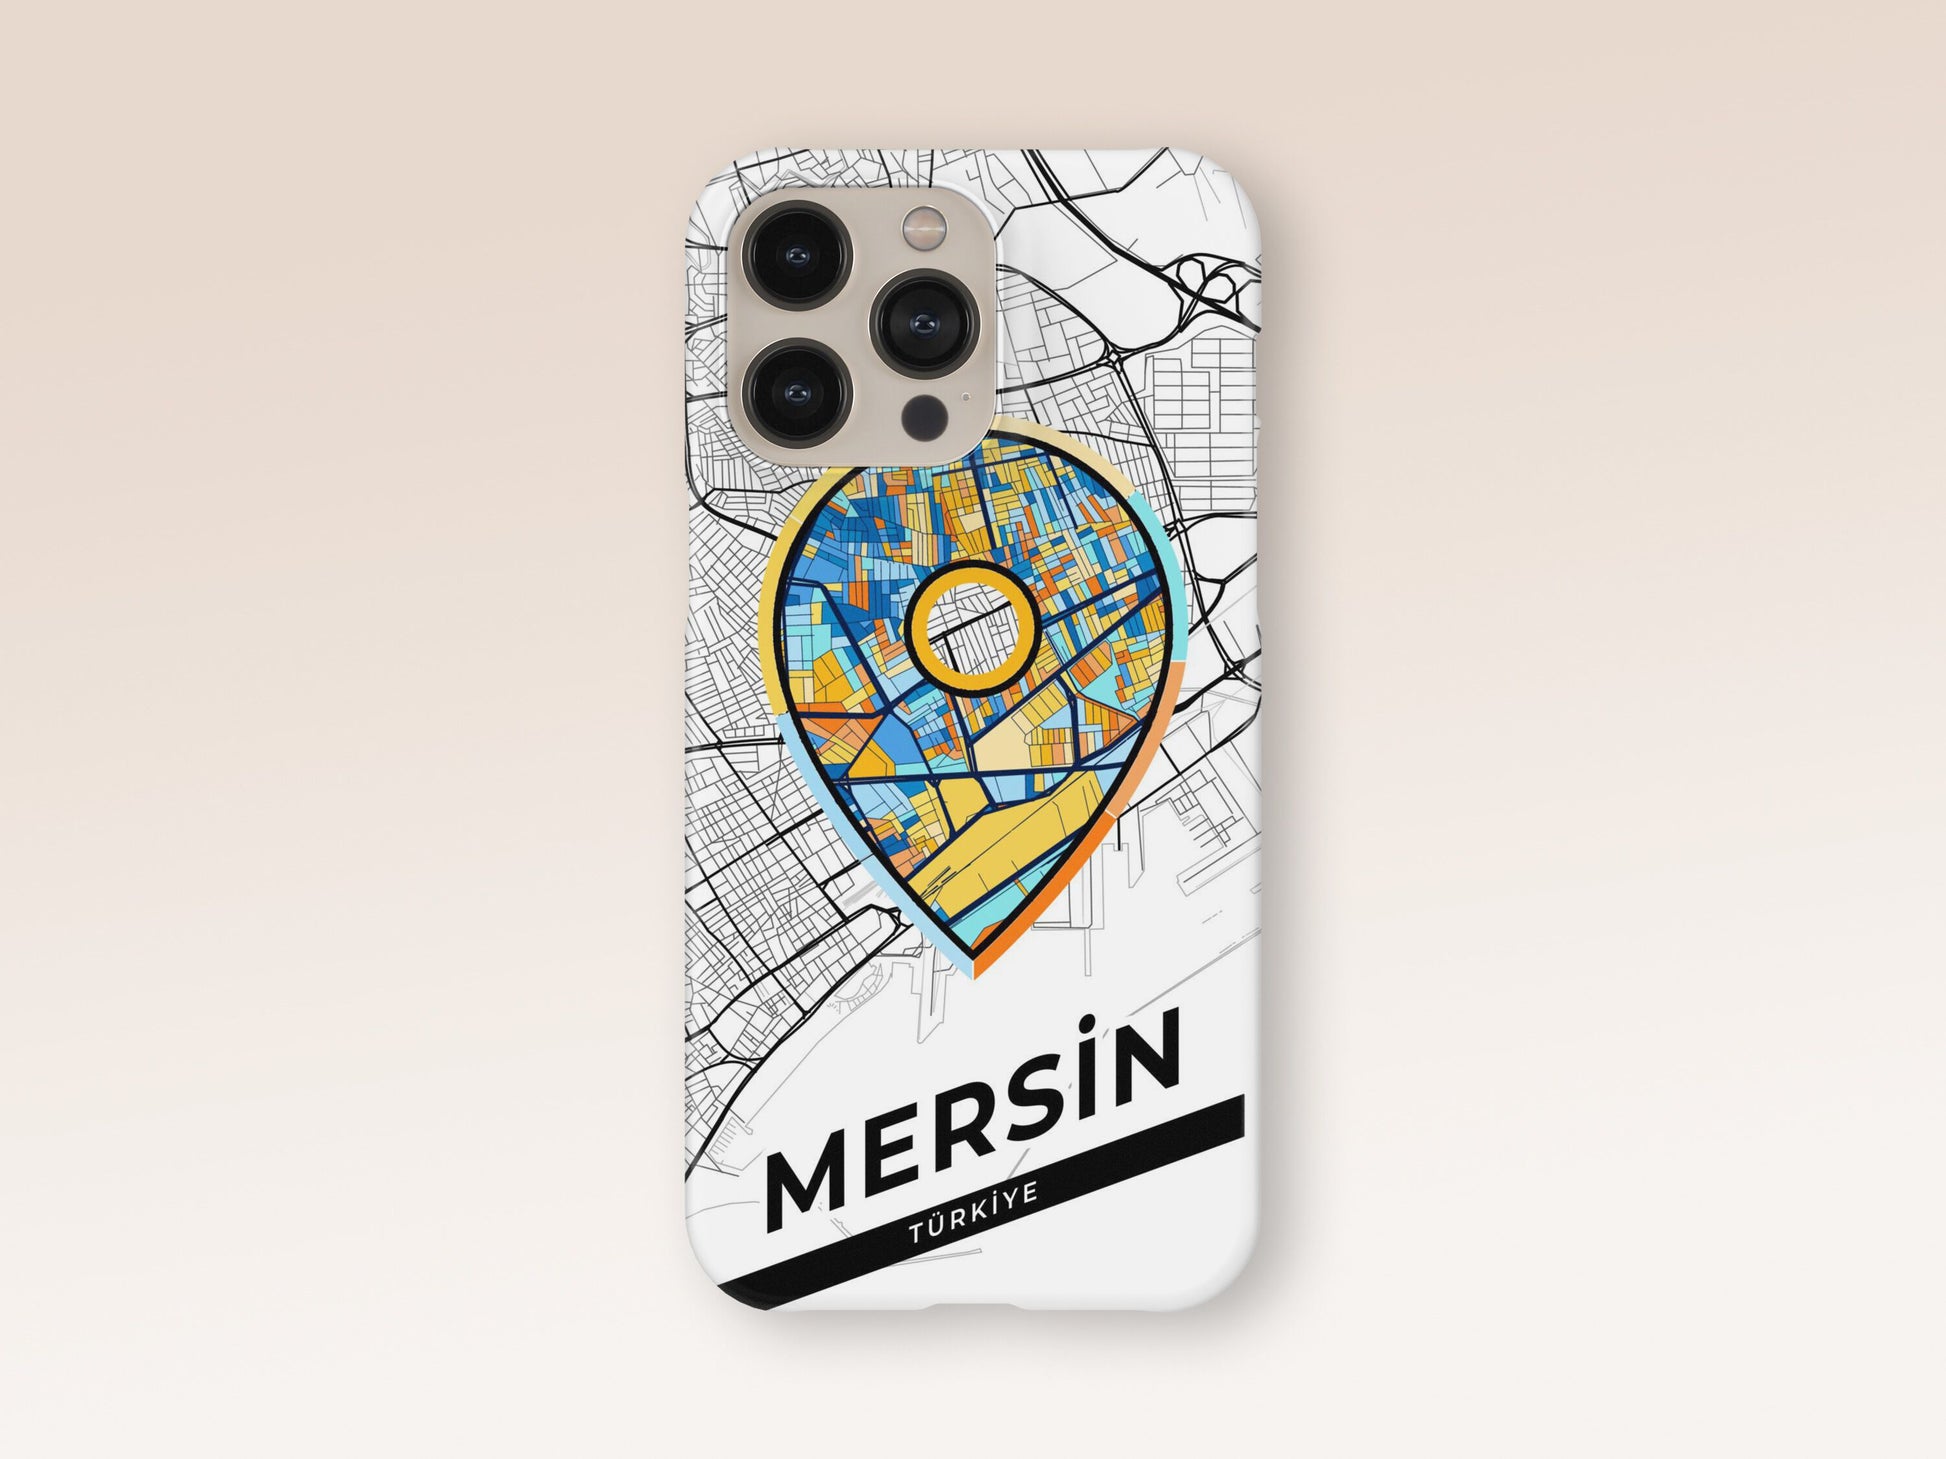 Mersin Turkey slim phone case with colorful icon 1